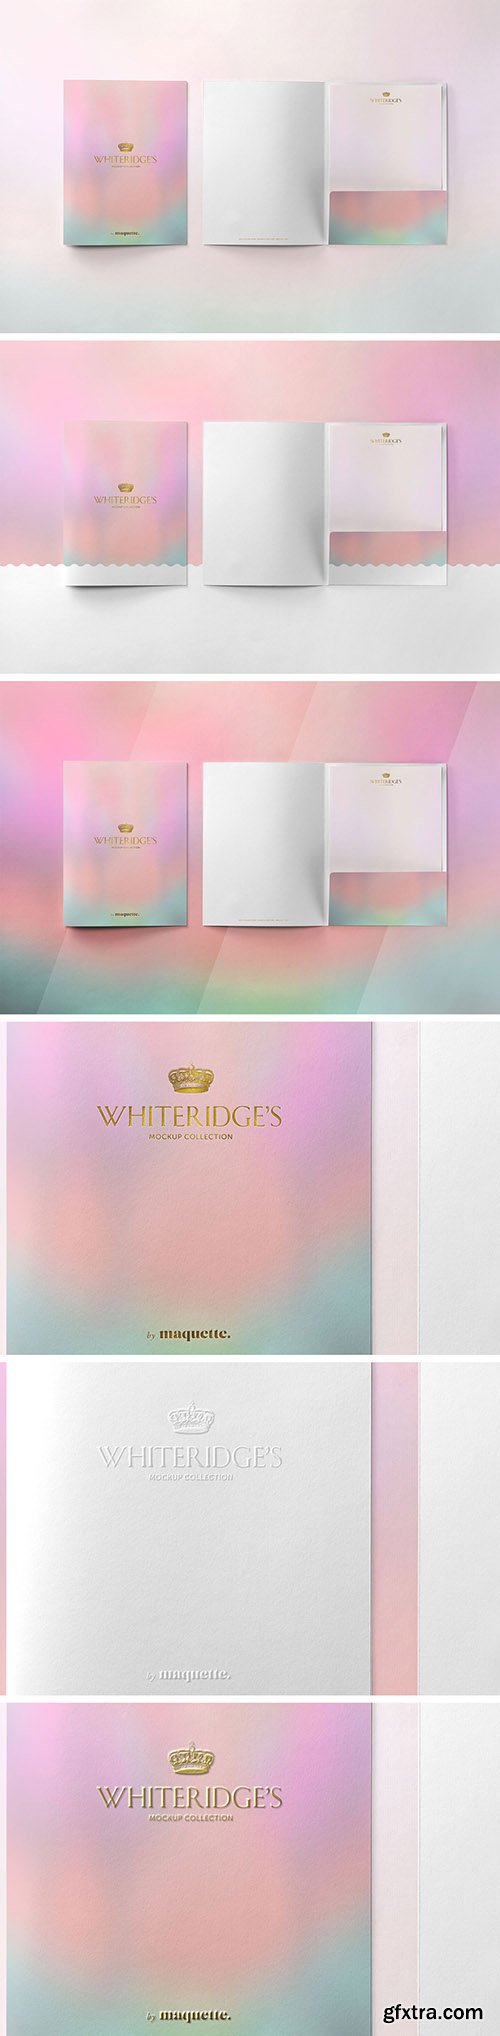 Luxury Gold-Embossed Corporate Stationery Mockup 1 130415122